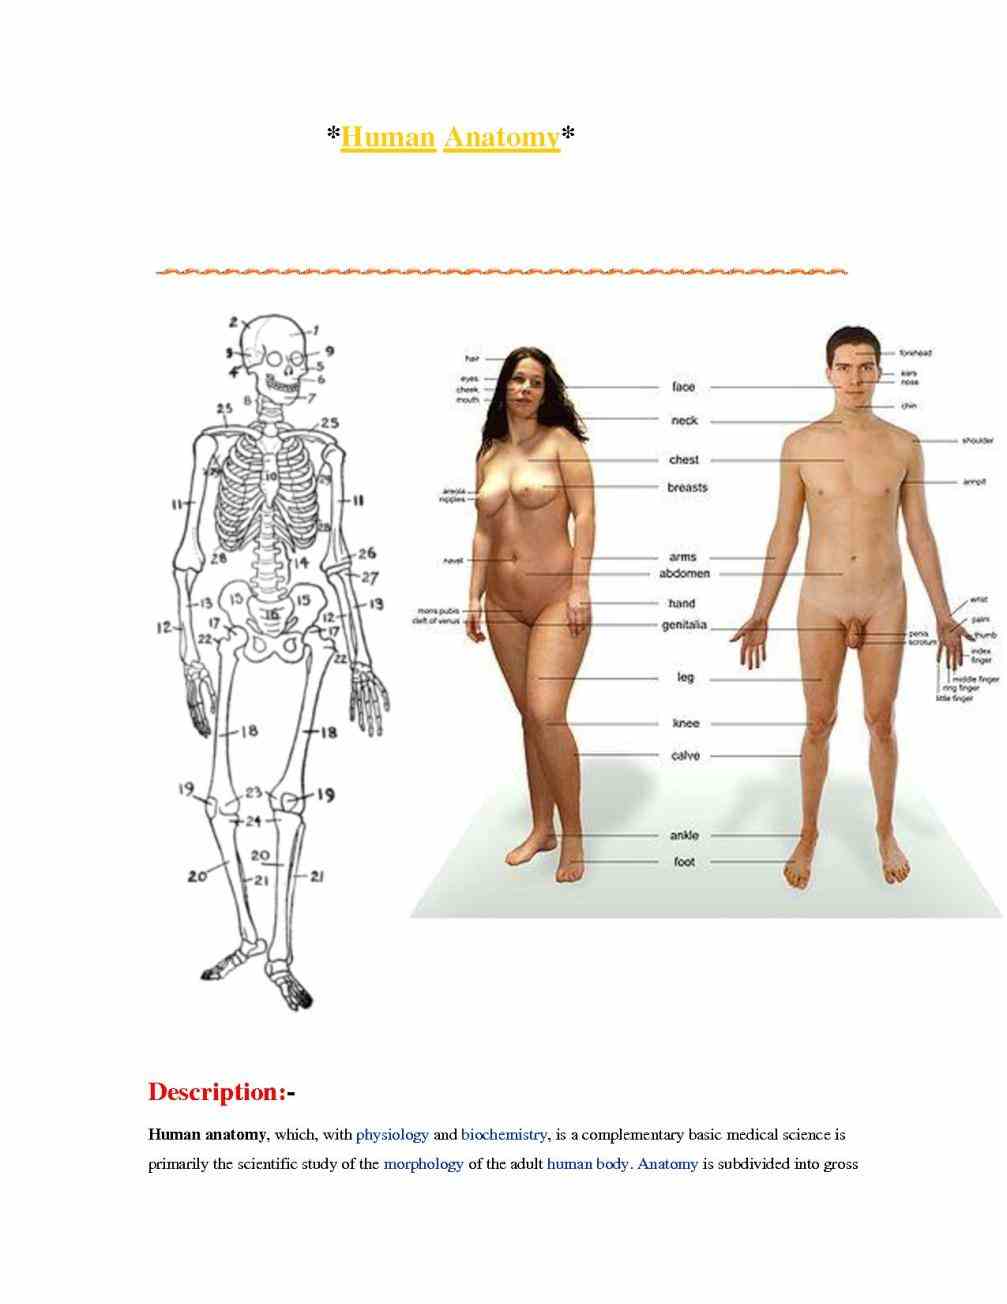 External Parts Of The Human Body Pictures Wallpapers